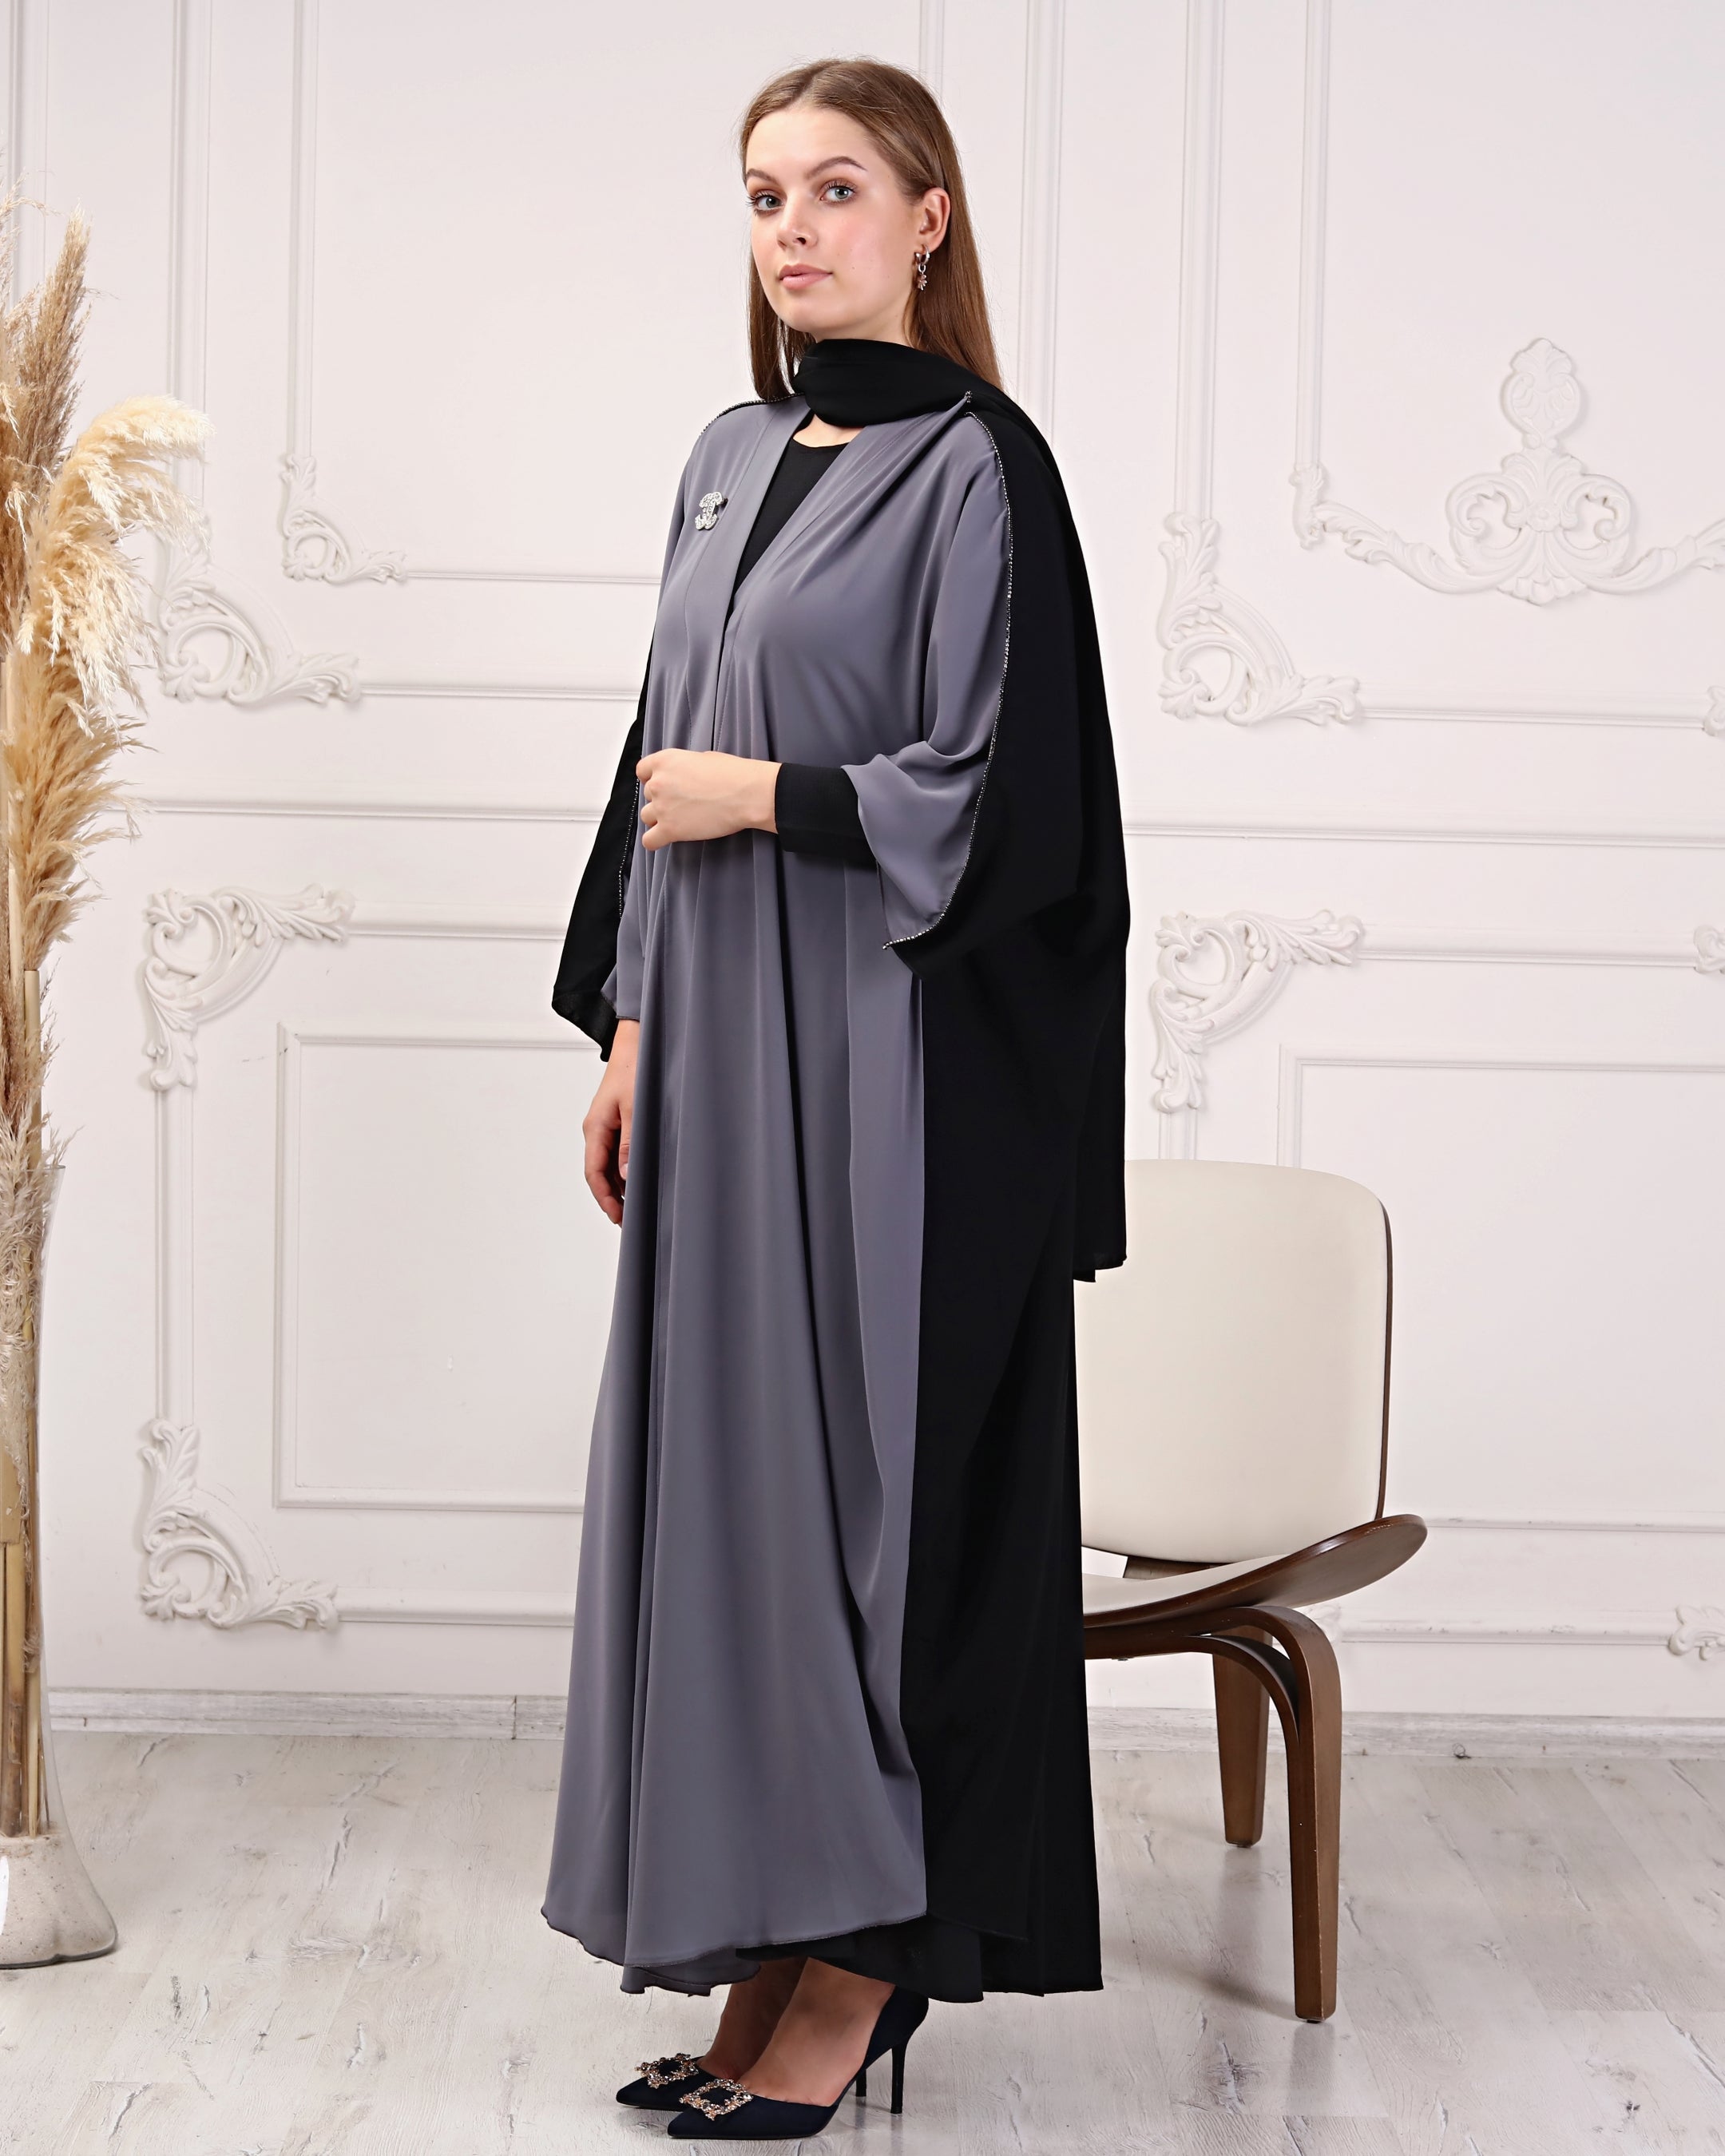 Baggy Beauty: Timeless Elegance in our Handcrafted Abaya